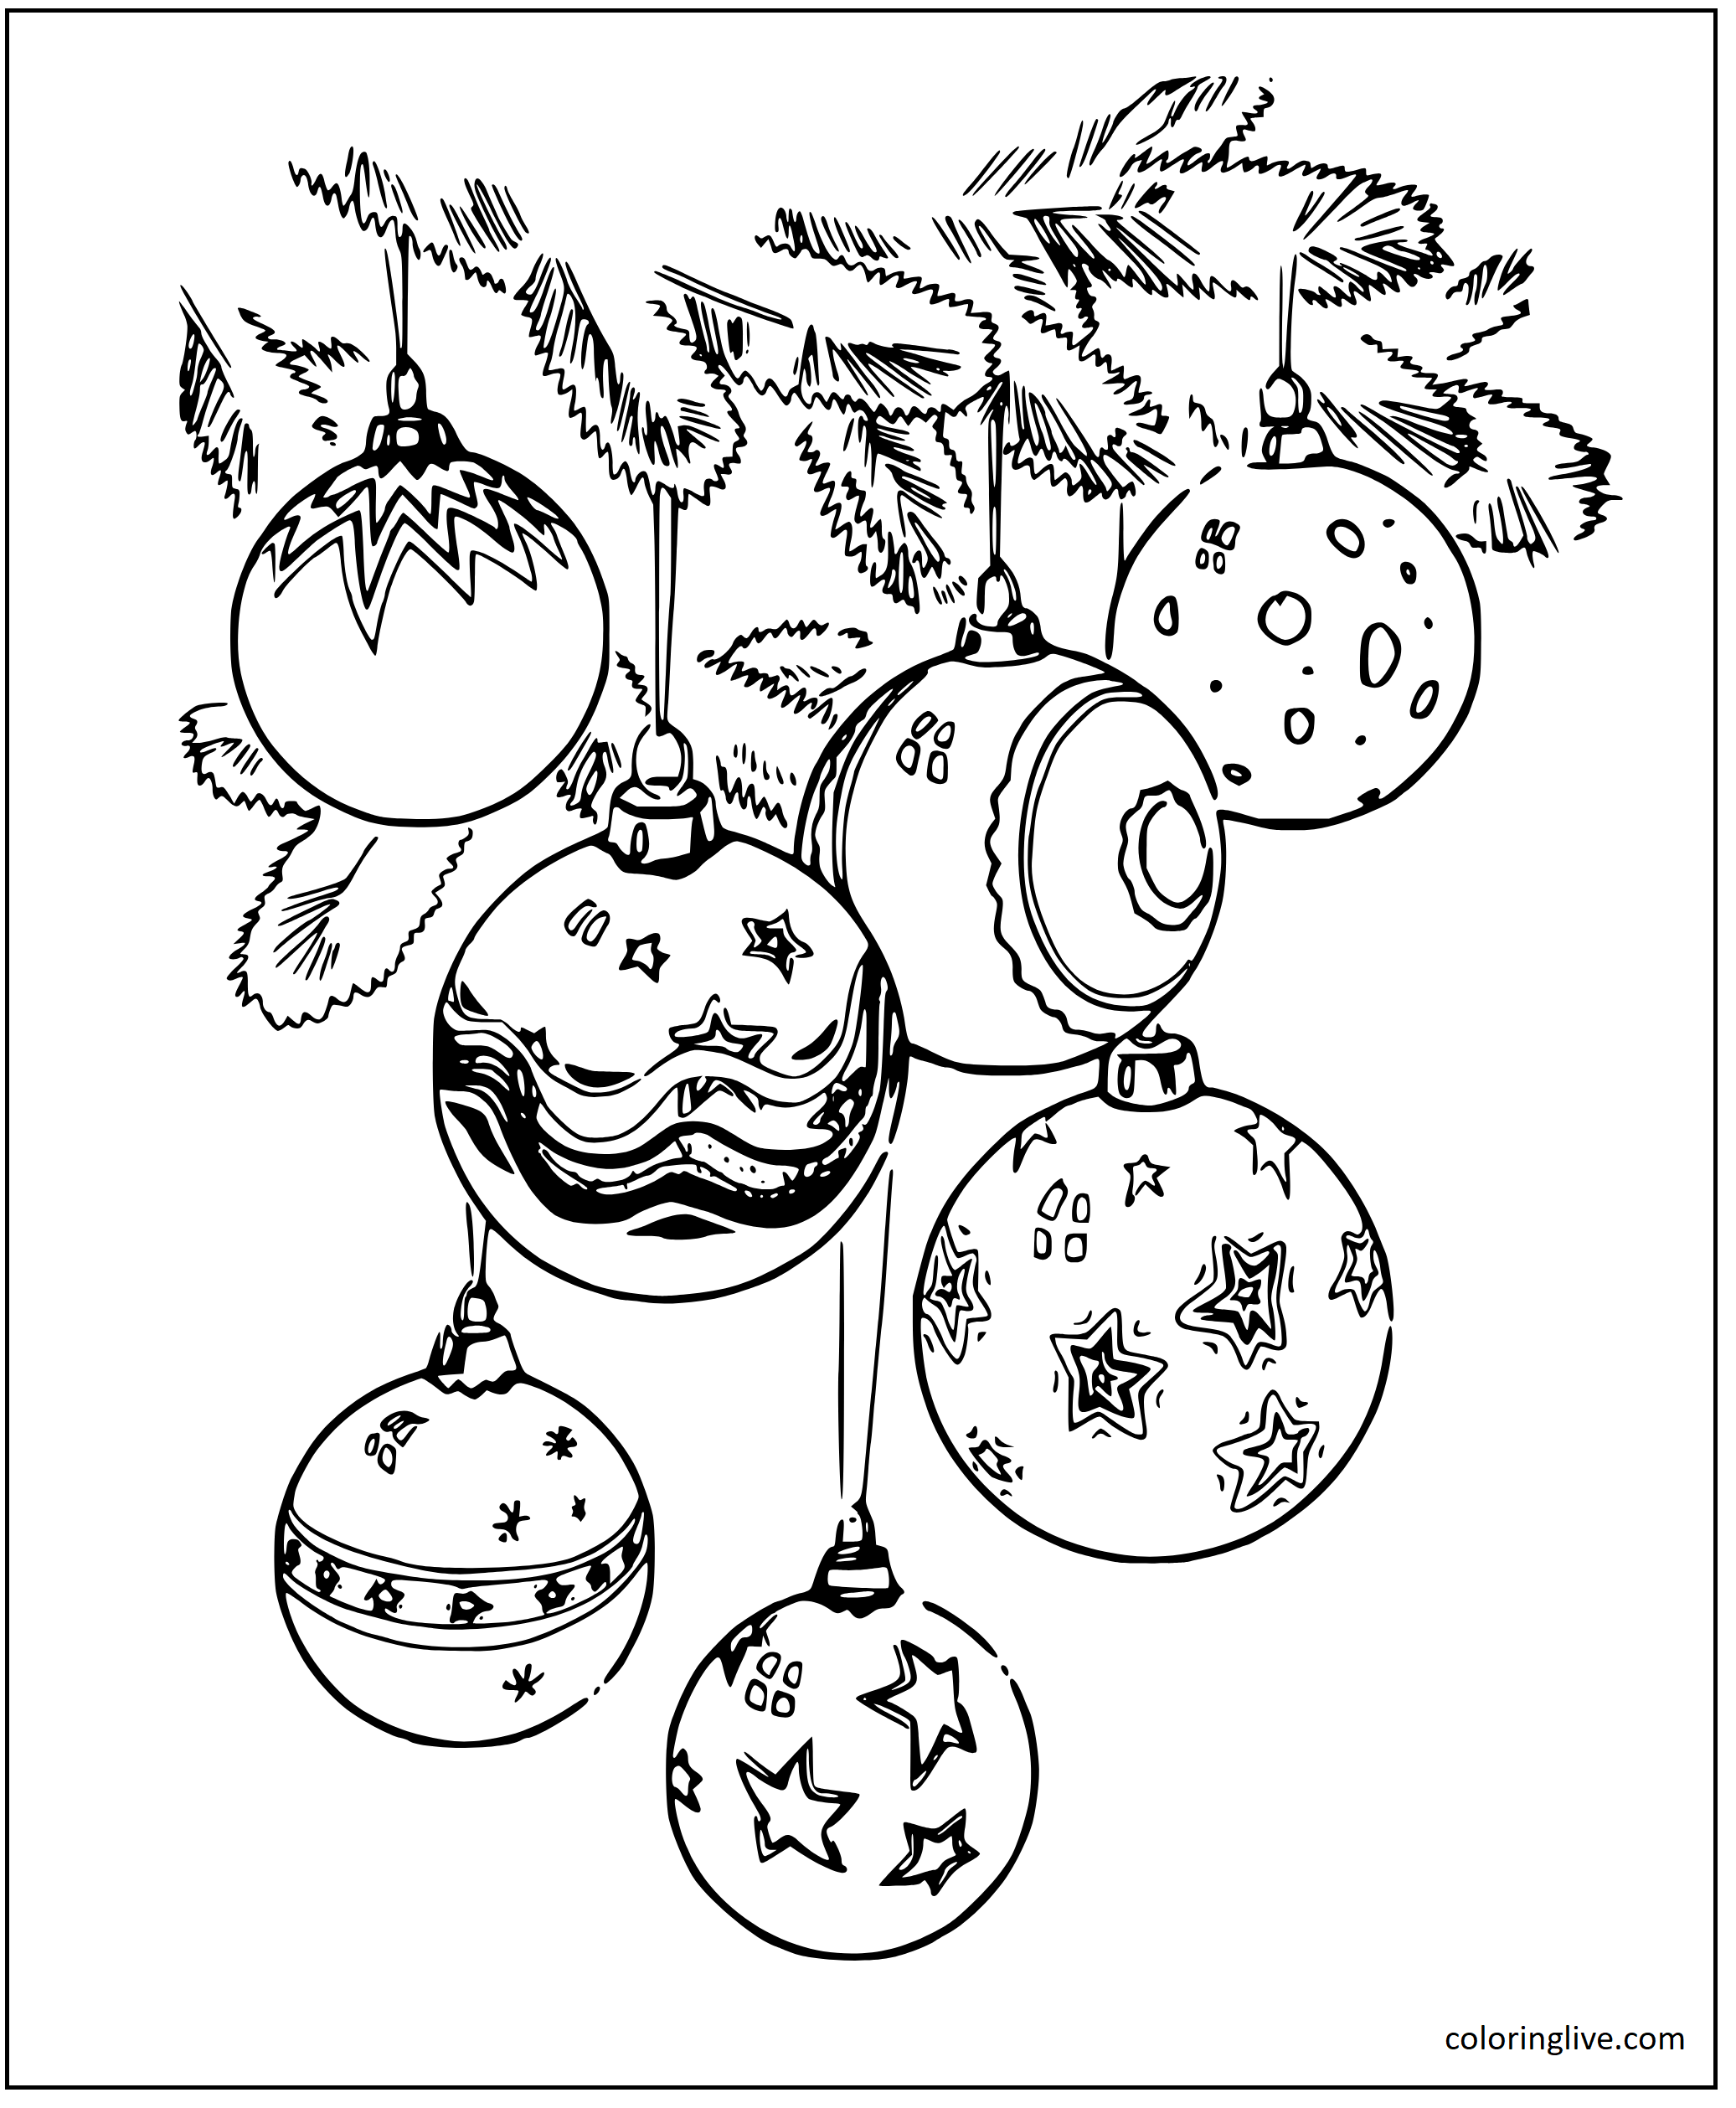 Printable Christmas Ornaments  sheets Coloring Page for kids.